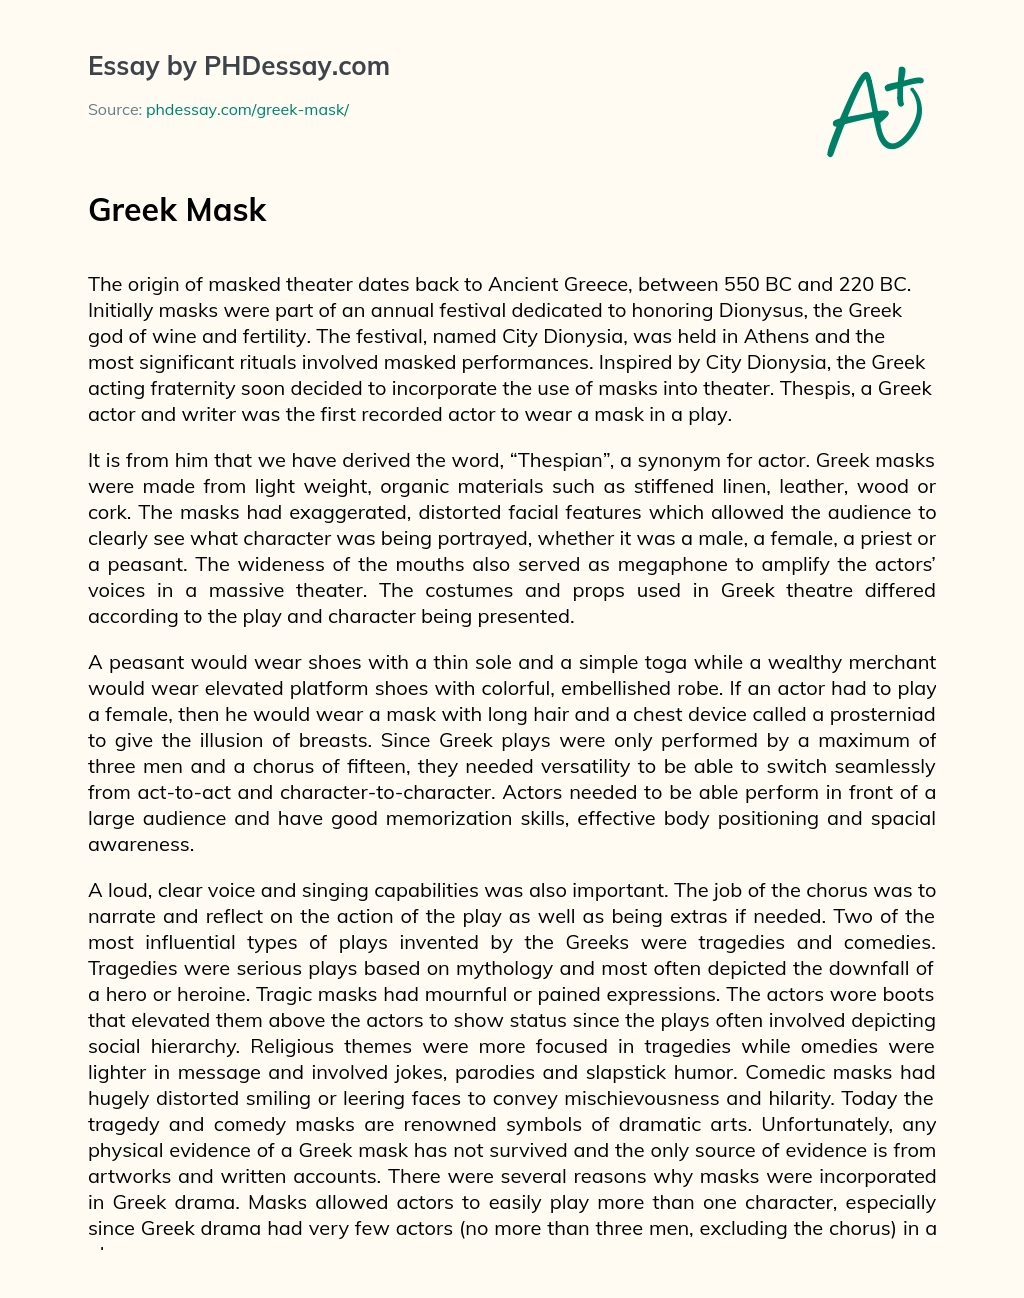 The Origin and Evolution of Masked Theater in Ancient Greece essay